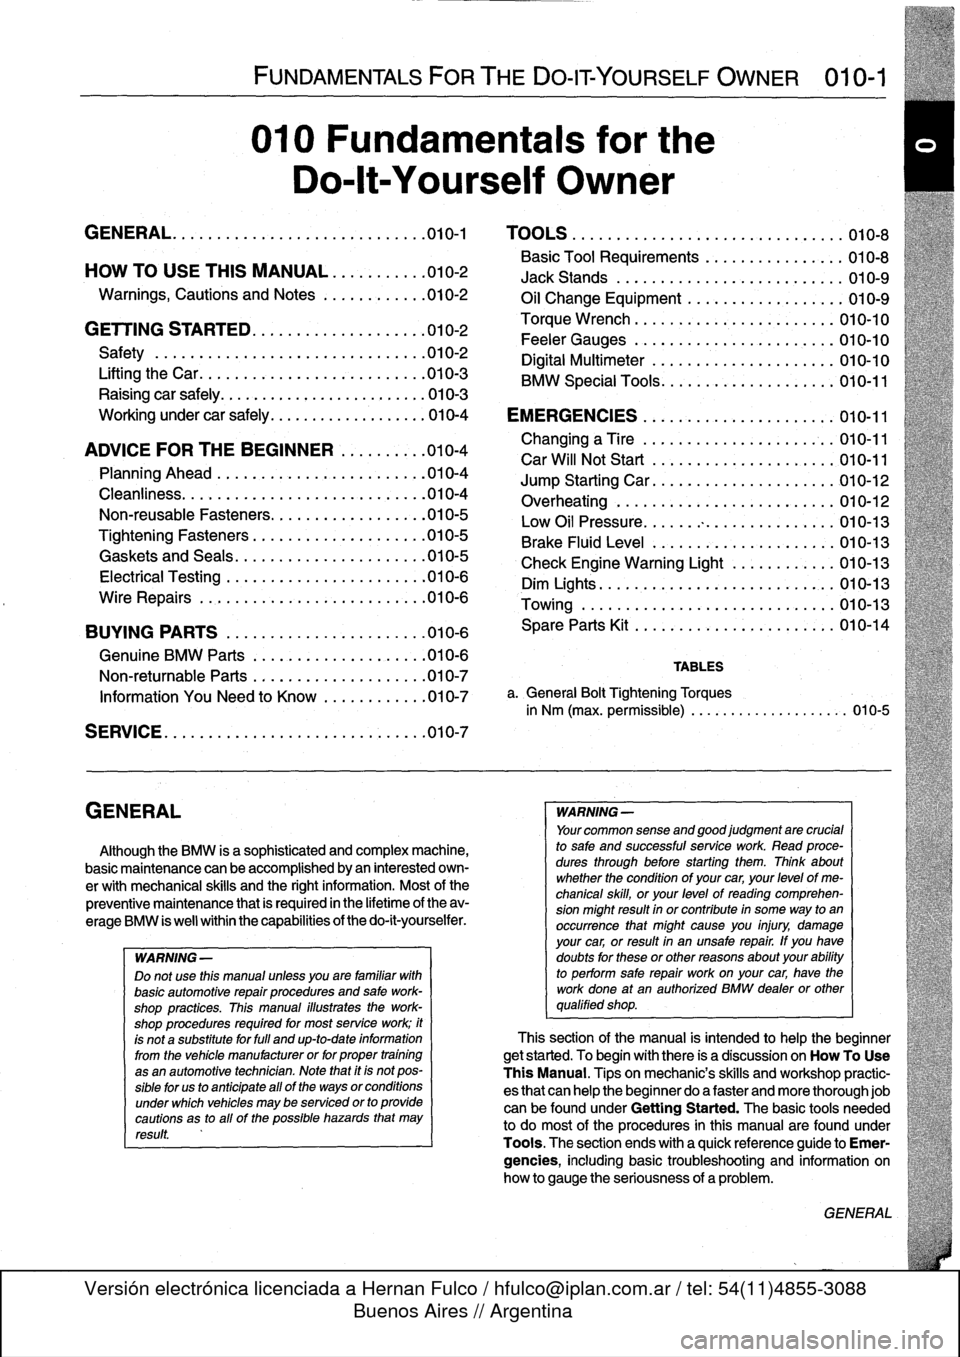 BMW 328i 1994 E36 Workshop Manual 
GENERAL

FUNDAMENTALS
FORTHE
DO-IT
YOURSELF
OWNER

	

010-1

010
Fundamentals
for
the

Do-lt-Yourself
Owner

GENERAL
.......
.
.
.
......
.
.........
.
.
.010-1

	

TOOLS
.
.
...
.
............
.
...